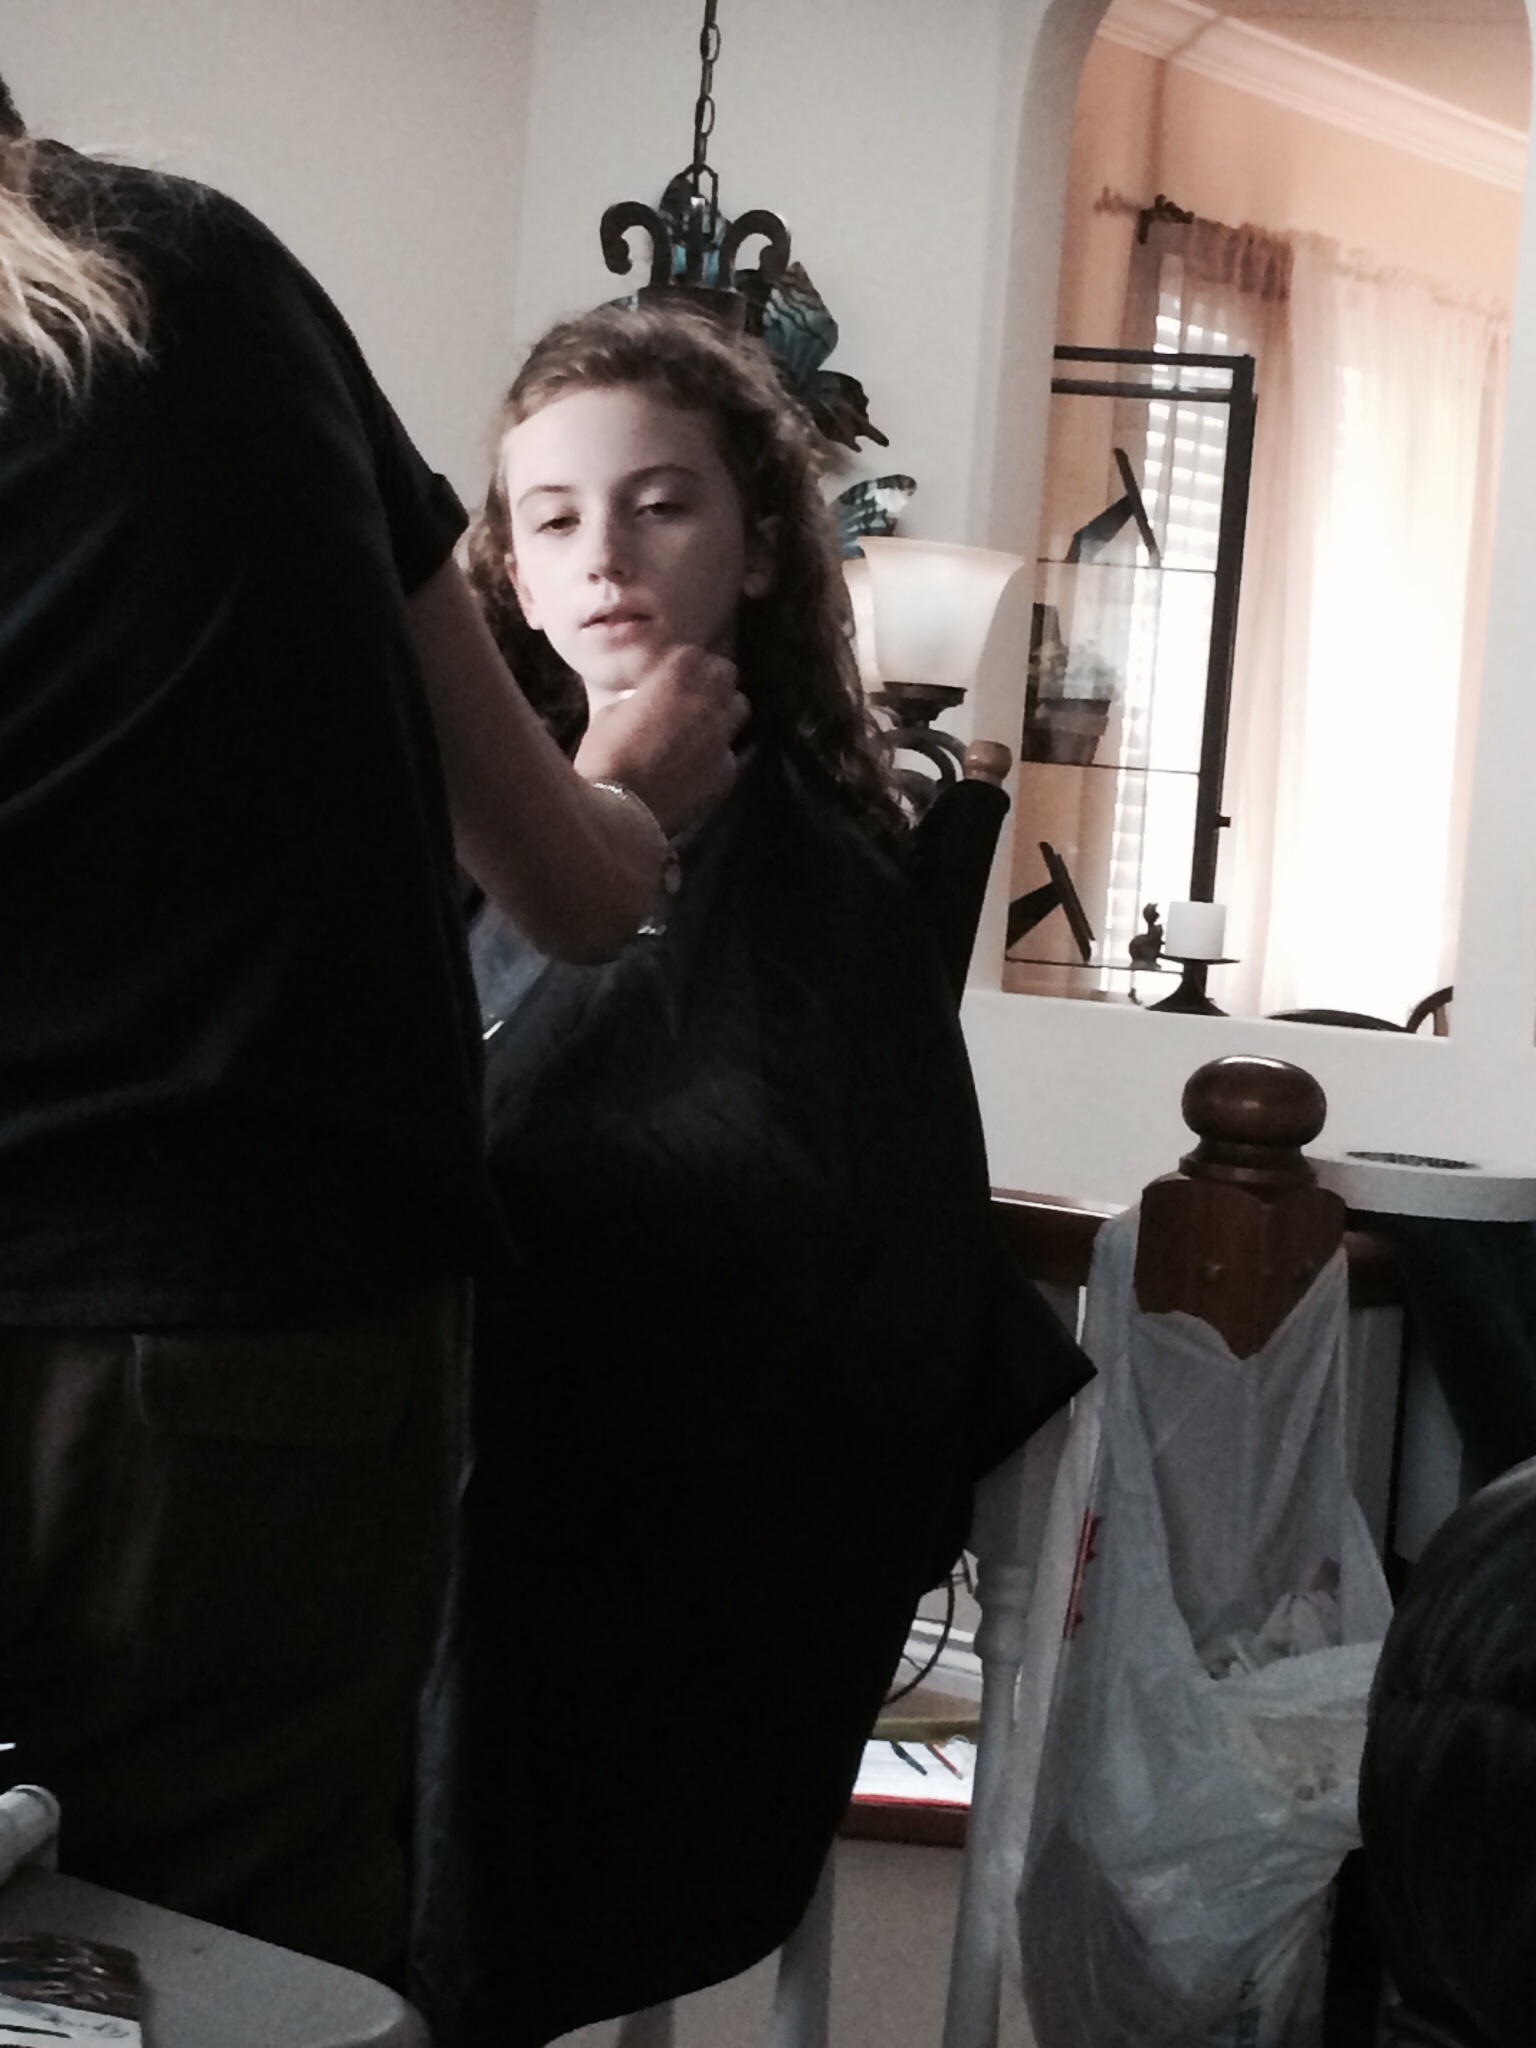 Magnolias Dollhouse - in makeup to look sick. Heart breaking drama that will bring you to tears.